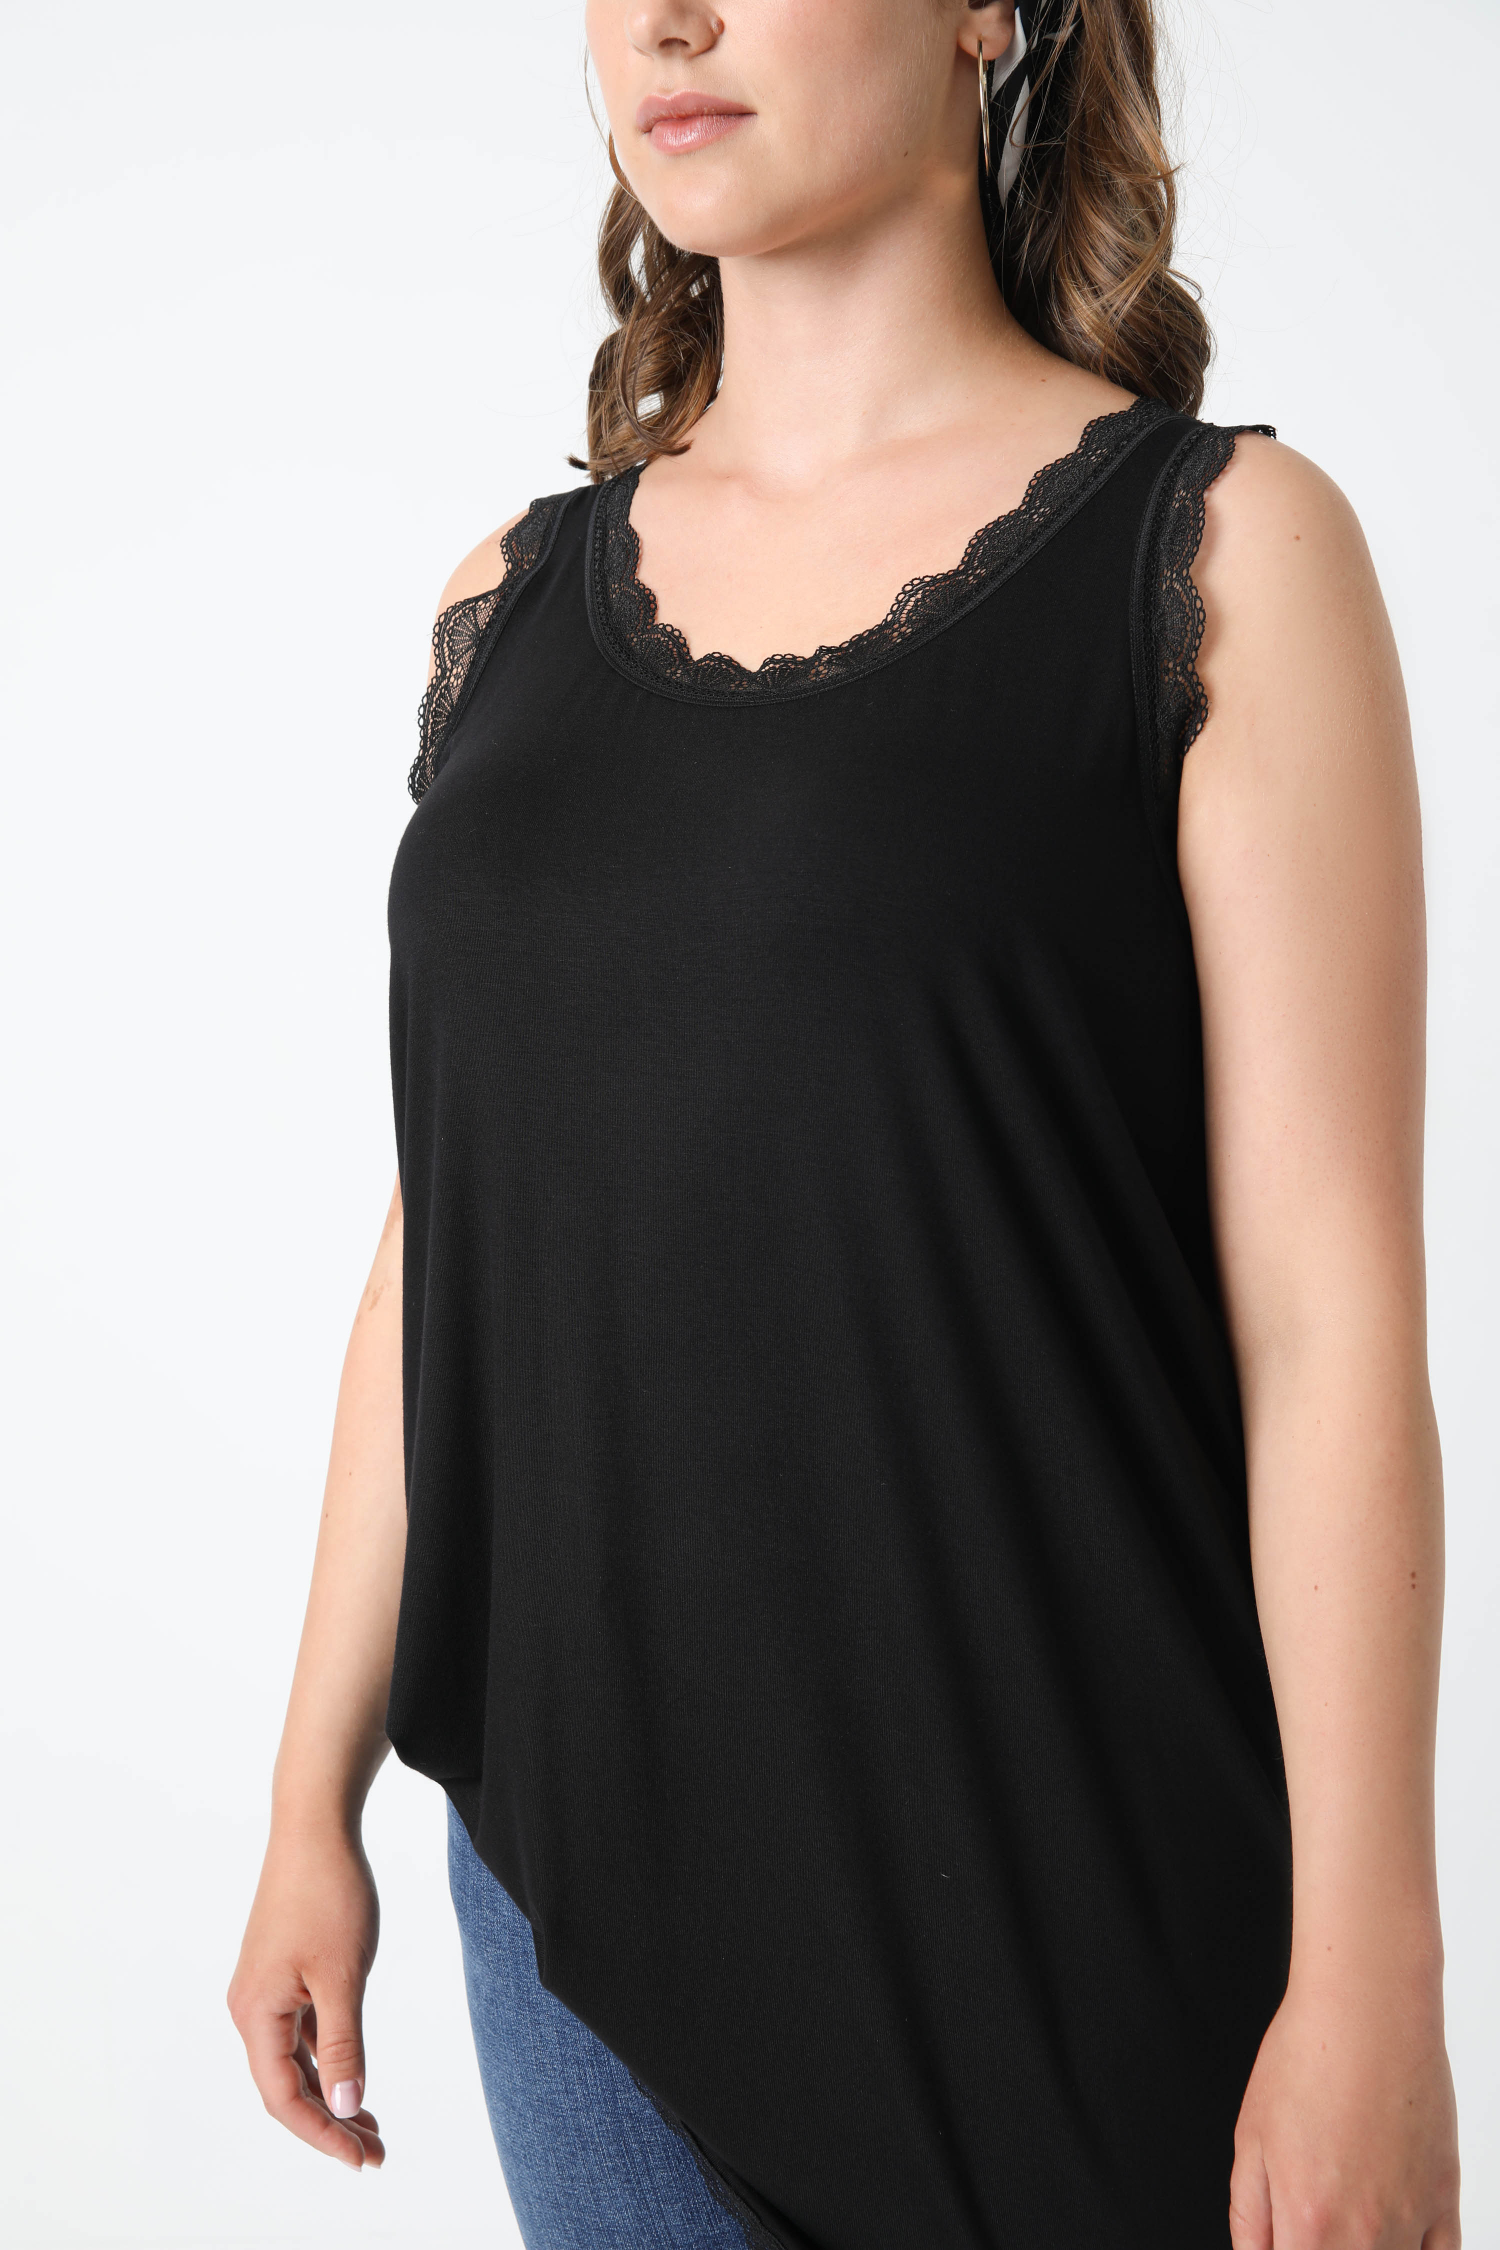 Long tank top with lace hem